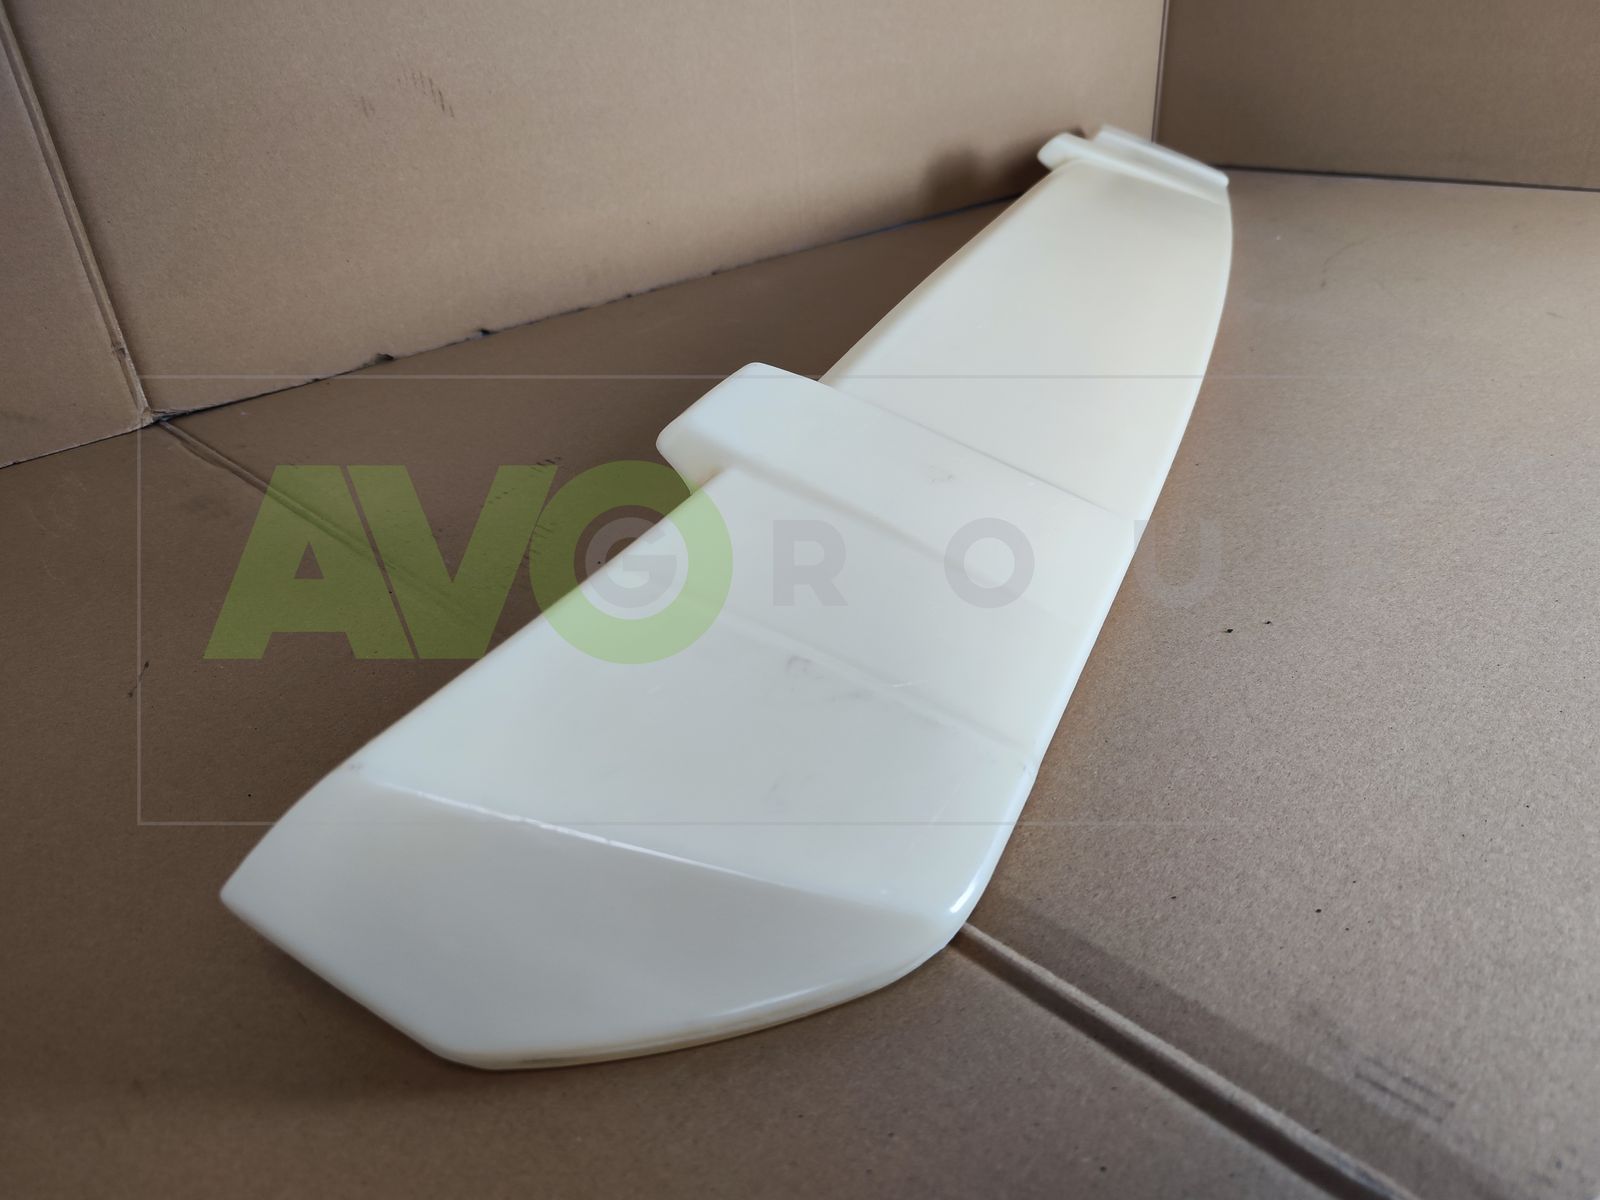 Roof Spoiler for MB Vito / Viano 2003-2014 ABS